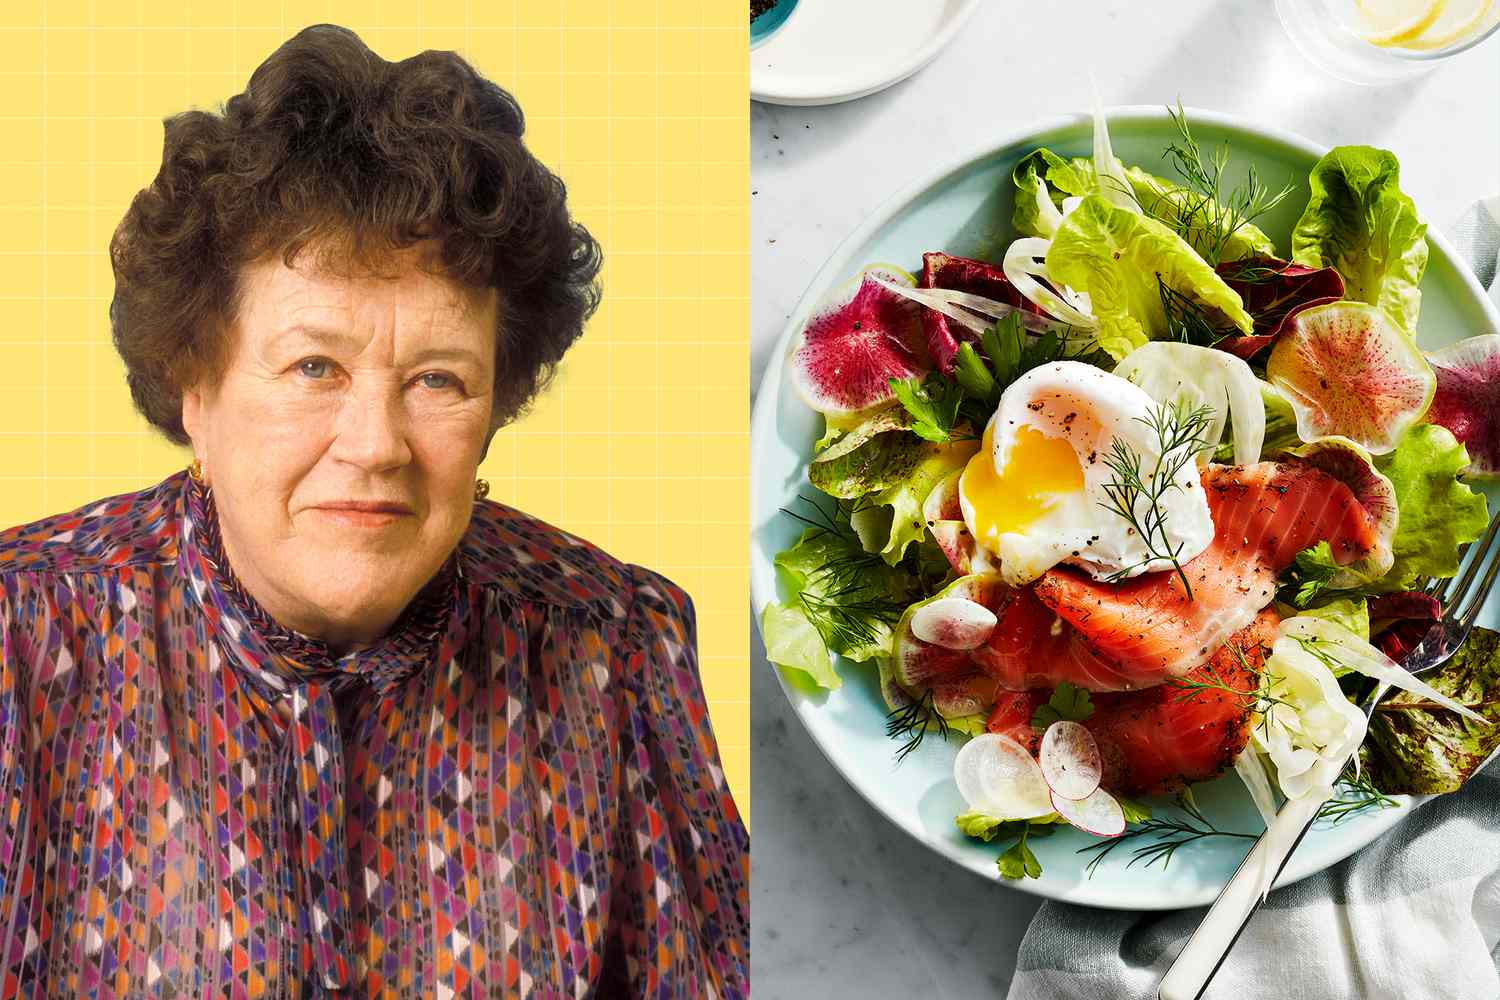 A portrait of Julia child next to Breakfast Salad with Smoked Salmon & Poached Eggs